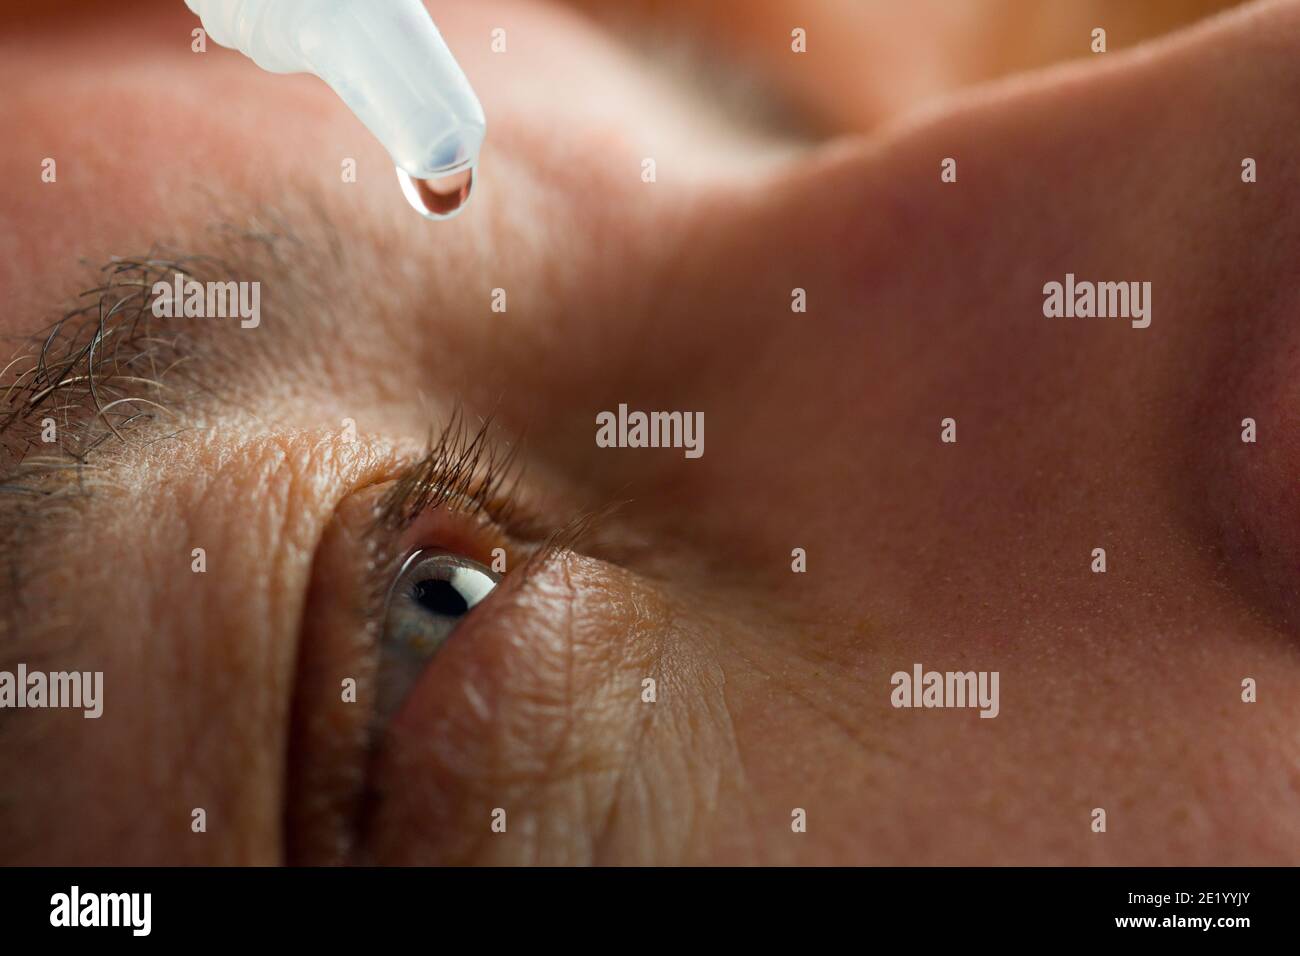 A man puts eye drops in his eyes before putting on contact lenses. Solution vision problems. Stock Photo